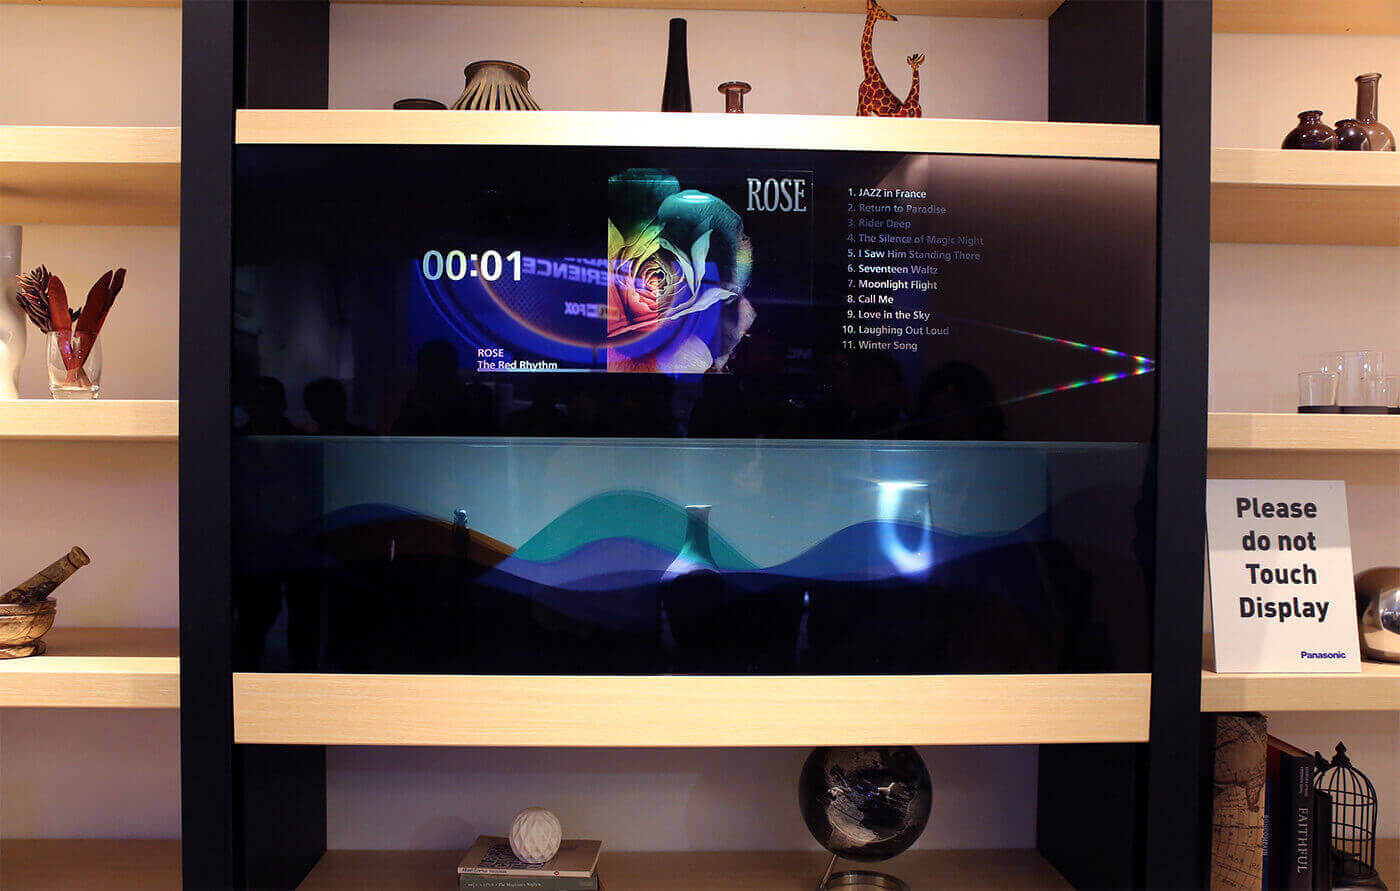 Panasonic Speaks Highly of Invisible TV, but How Long Until Consumers See It?